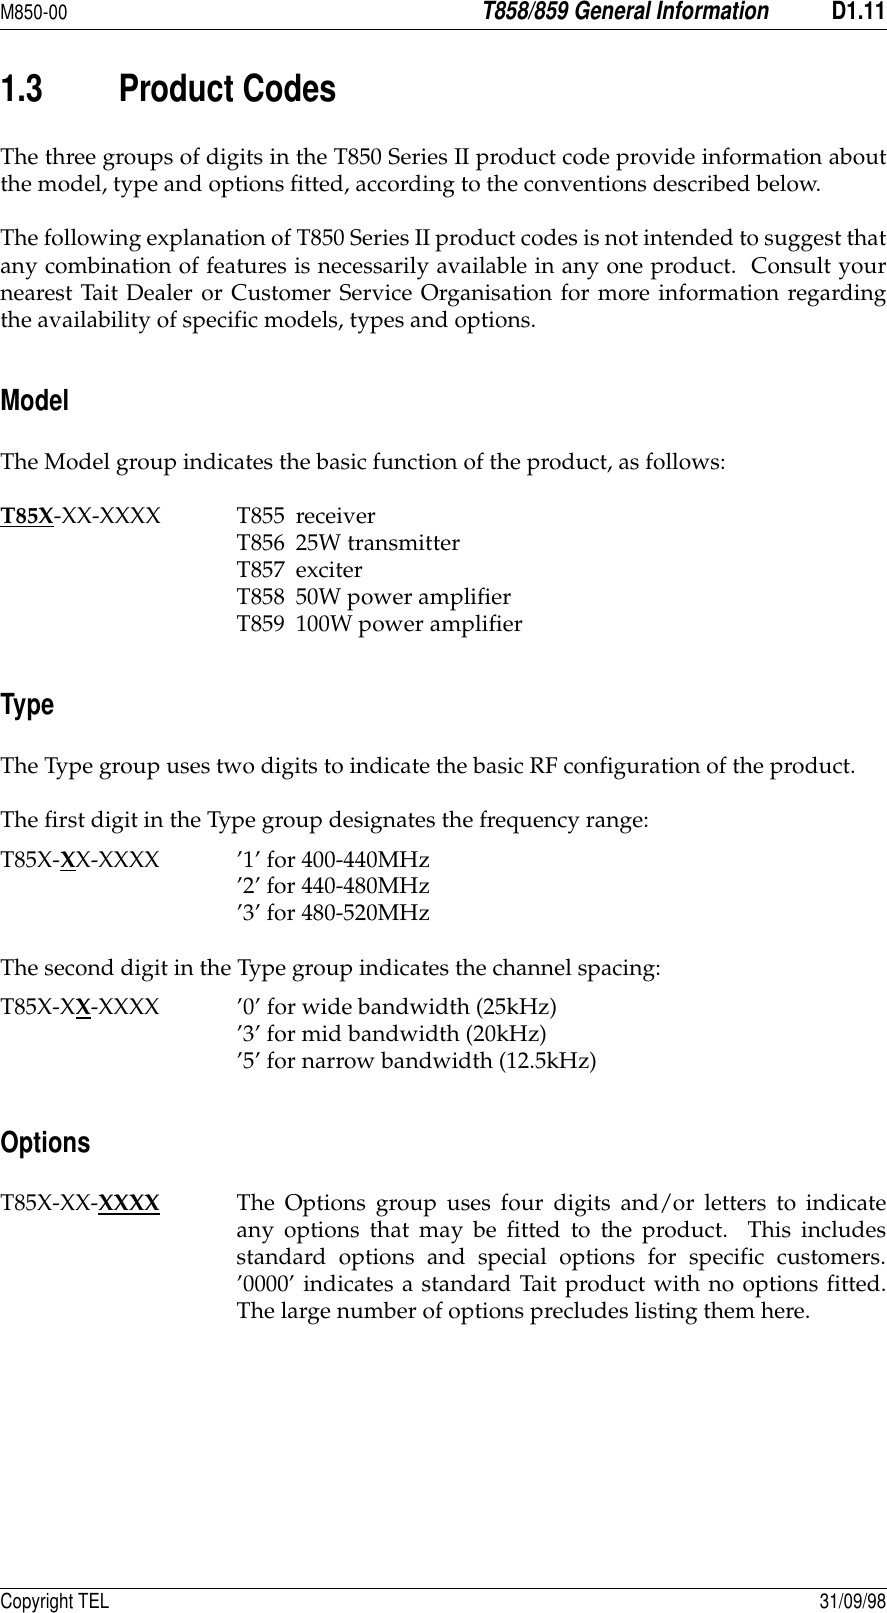 M850-00T858/859 General InformationD1.11Copyright TEL 31/09/981.3 Product CodesThe three groups of digits in the T850 Series II product code provide information aboutthe model, type and options fitted, according to the conventions described below.The following explanation of T850 Series II product codes is not intended to suggest thatany combination of features is necessarily available in any one product.  Consult yournearest Tait Dealer or Customer Service Organisation for more information regardingthe availability of specific models, types and options.ModelThe Model group indicates the basic function of the product, as follows:T85X-XX-XXXX T855 receiverT856 25W transmitterT857 exciterT858 50W power amplifierT859 100W power amplifierTypeThe Type group uses two digits to indicate the basic RF configuration of the product.The first digit in the Type group designates the frequency range:T85X-XX-XXXX ’1’ for 400-440MHz’2’ for 440-480MHz’3’ for 480-520MHzThe second digit in the Type group indicates the channel spacing:T85X-XX-XXXX ’0’ for wide bandwidth (25kHz)’3’ for mid bandwidth (20kHz)’5’ for narrow bandwidth (12.5kHz)OptionsT85X-XX-XXXX The Options group uses four digits and/or letters to indicateany options that may be fitted to the product.  This includesstandard options and special options for specific customers.’0000’ indicates a standard Tait product with no options fitted.The large number of options precludes listing them here.